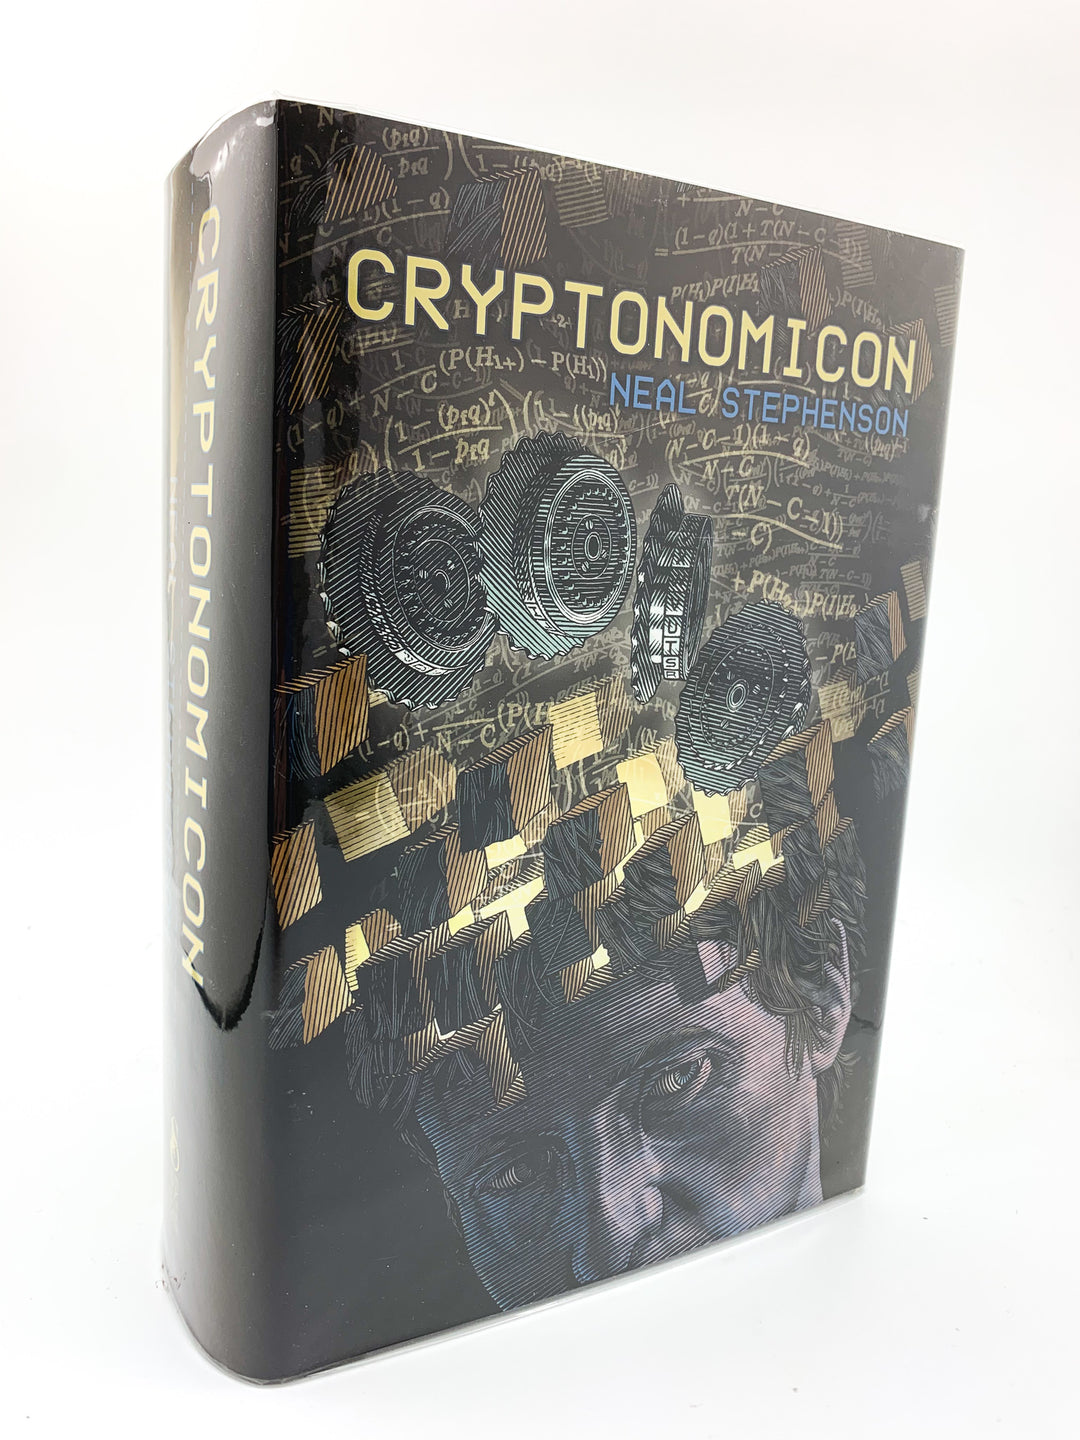 Stephenson, Neal - Cryptonomicon - SIGNED | front cover